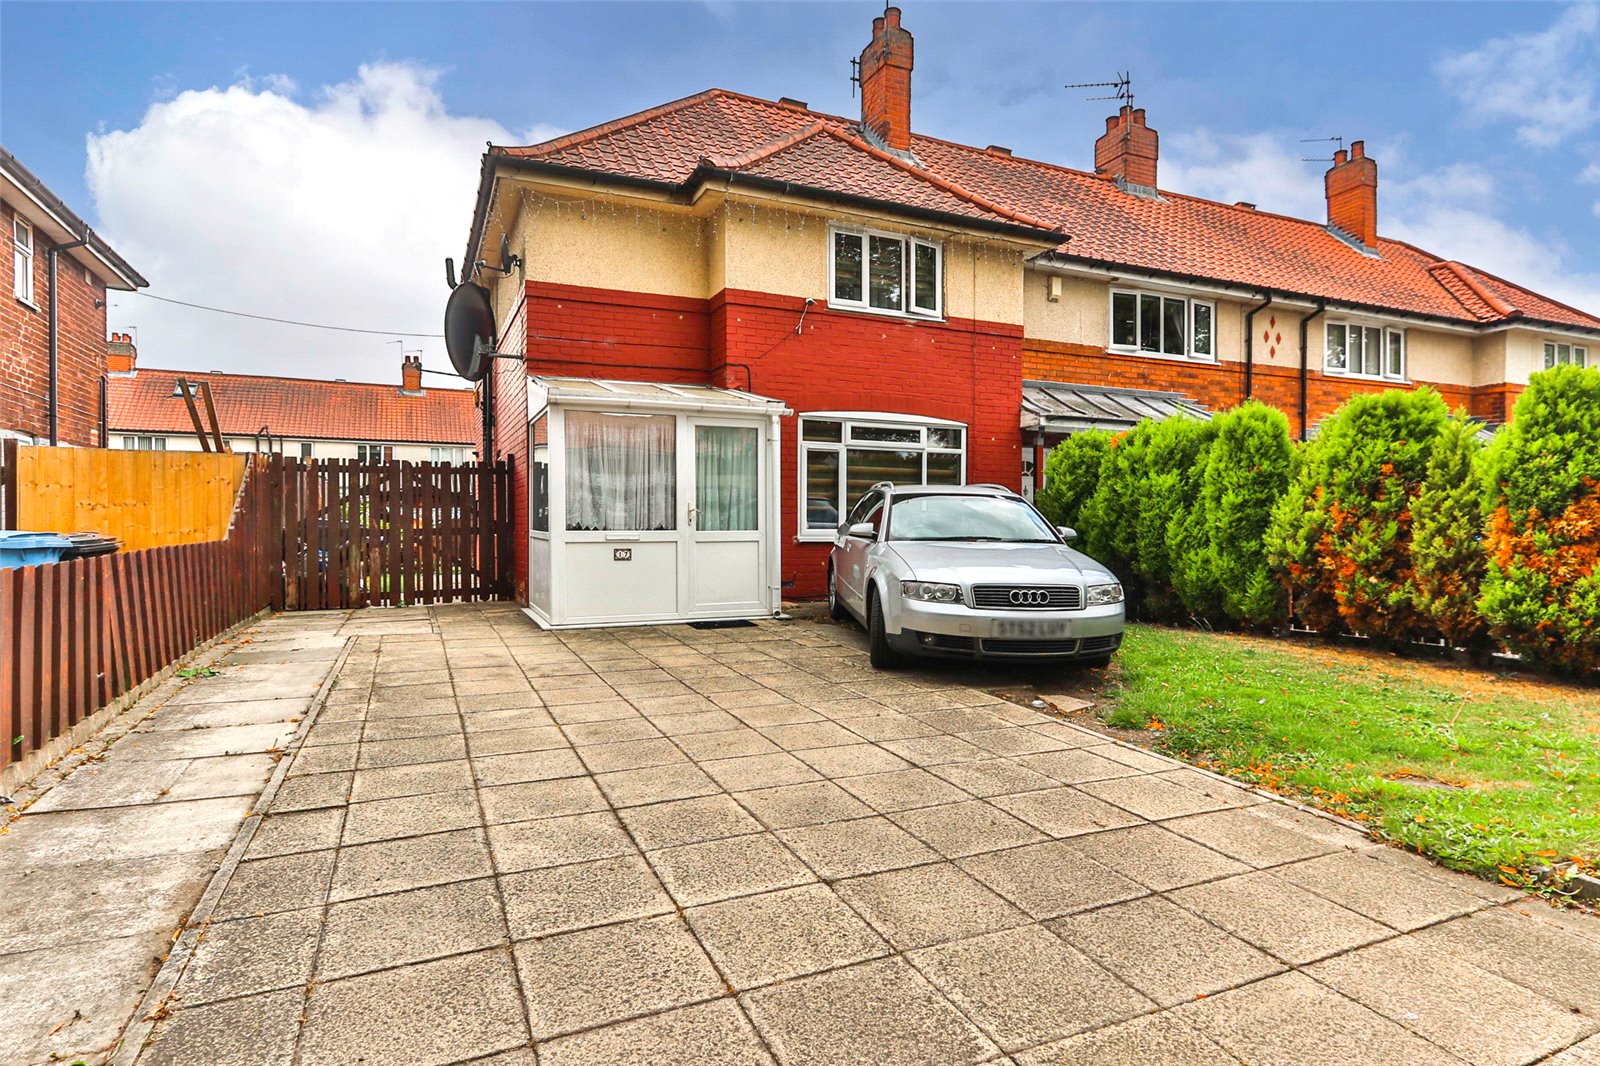 3 bed house for sale in York Road, Hull - Property Image 1